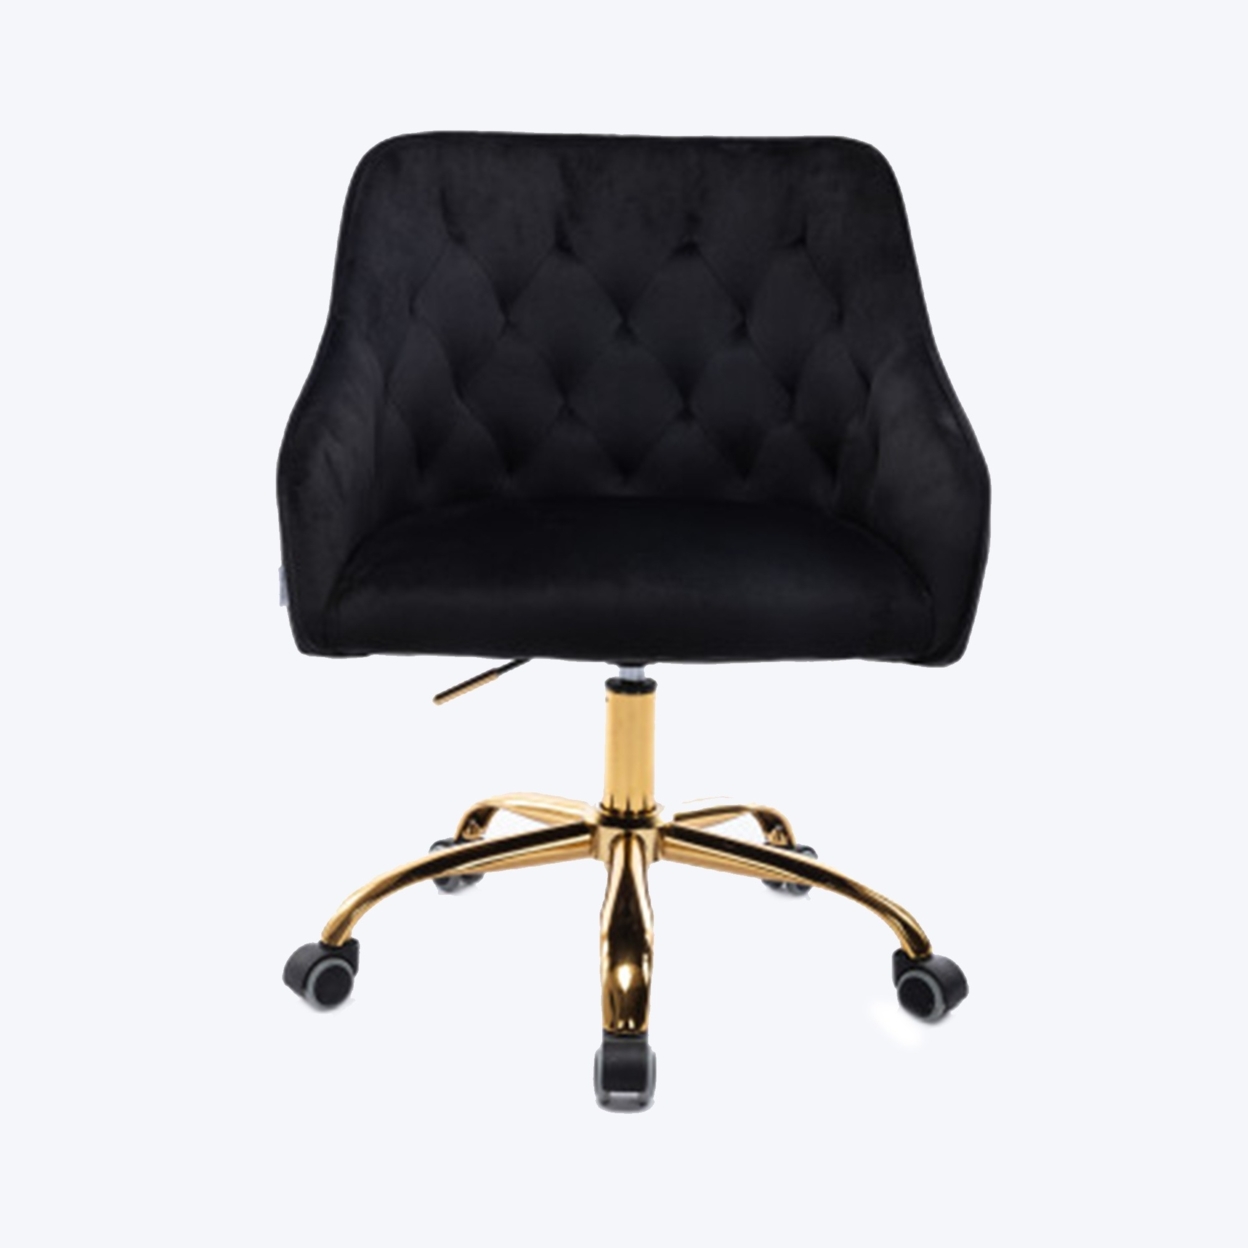 Office Chair With Padded Swivel Seat And Tufted Design, Black- Saltoro Sherpi